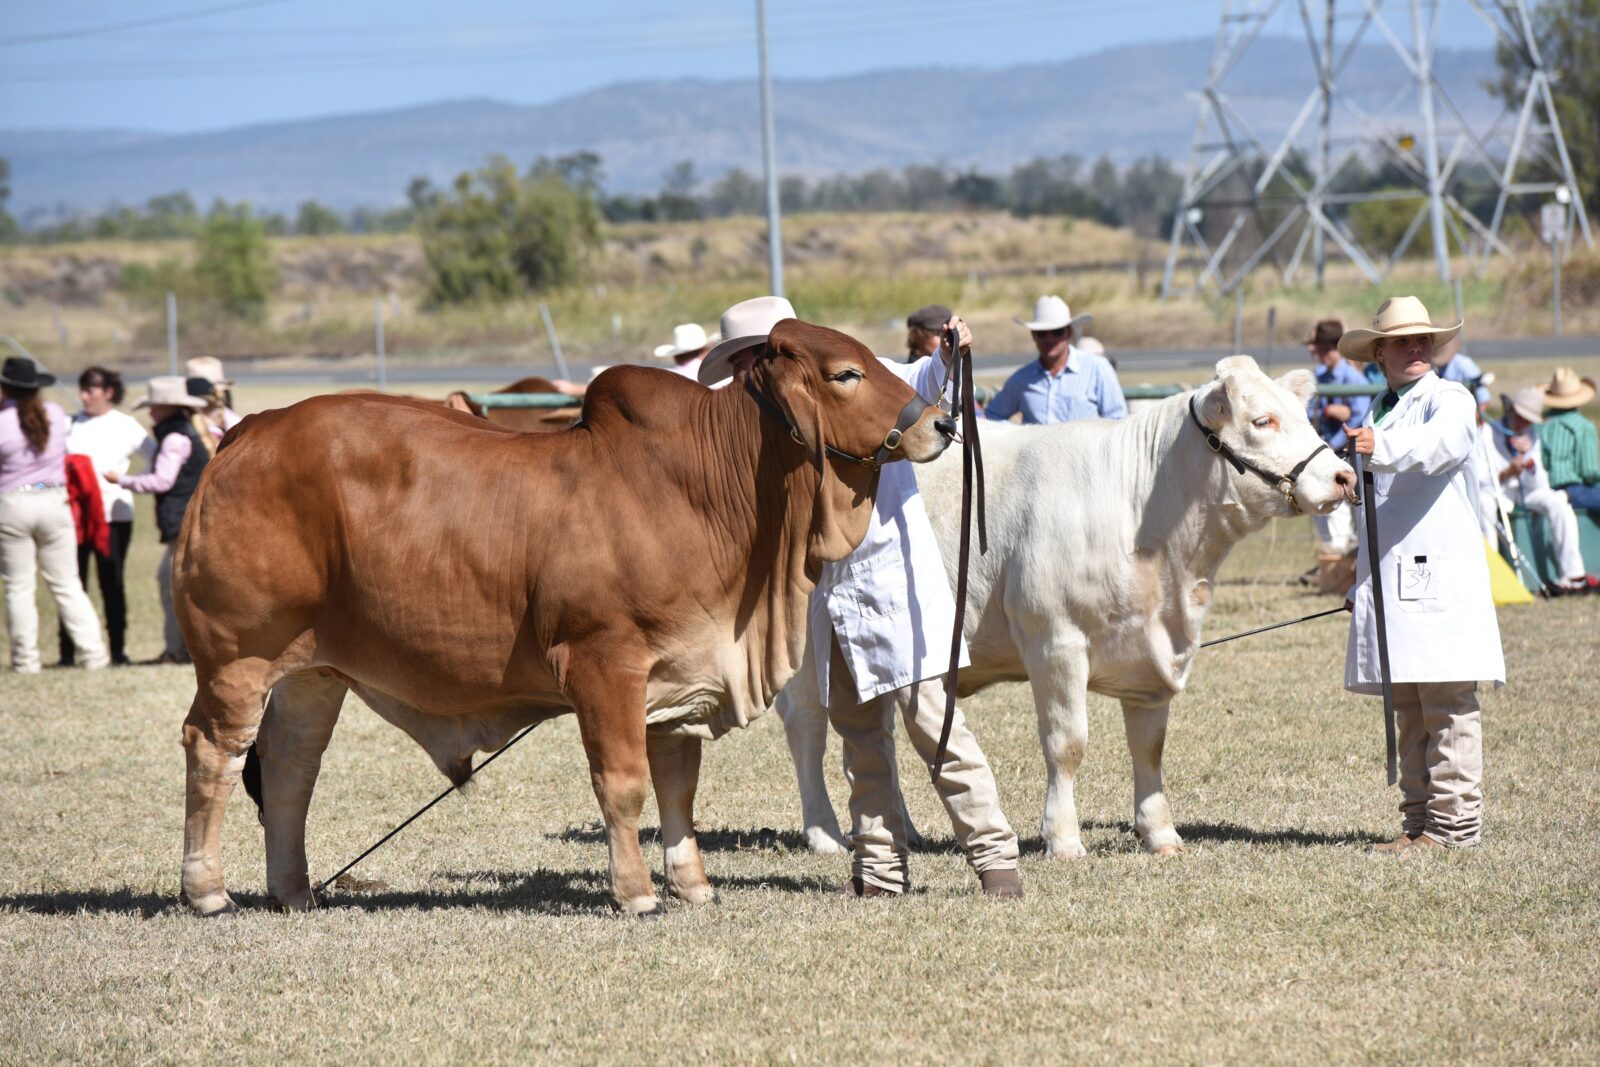 Cattle being shown